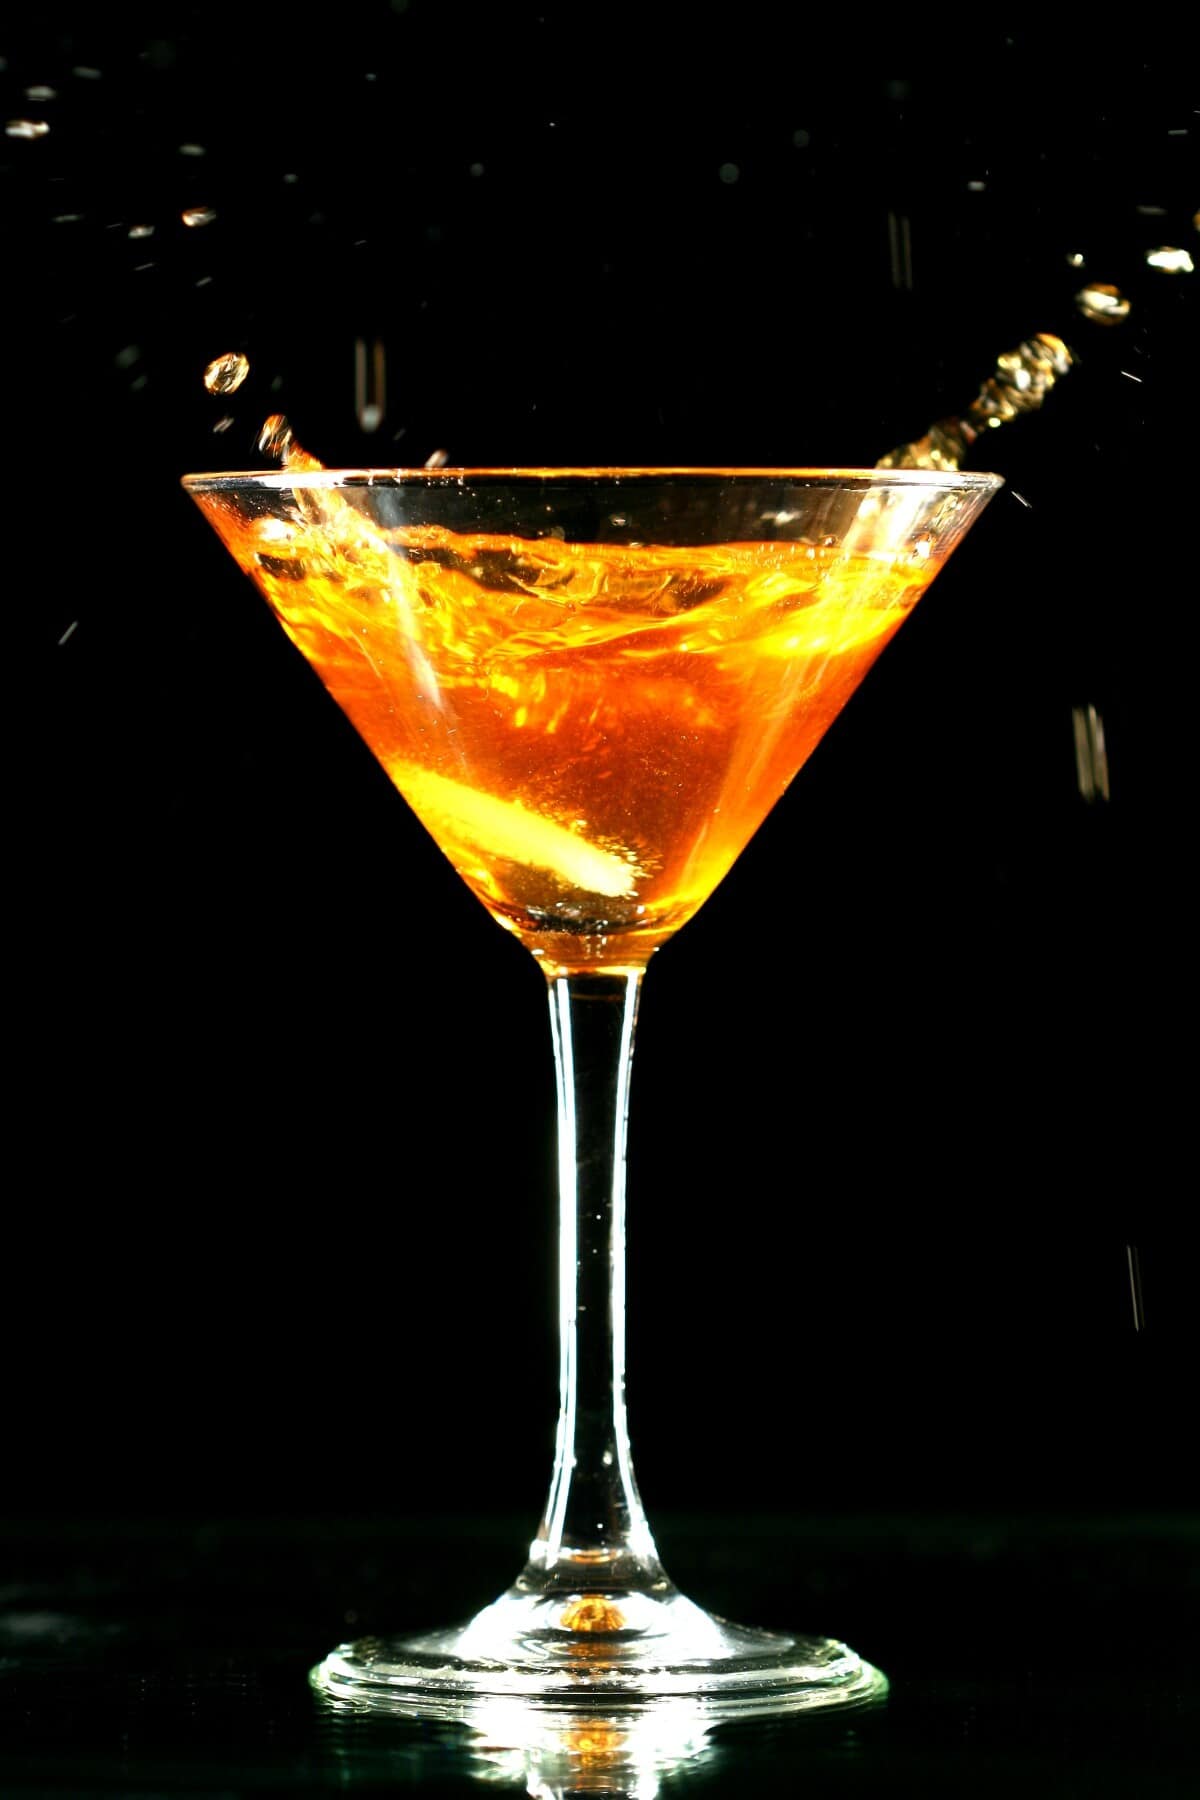 alcohol coctail in martini glass on black background